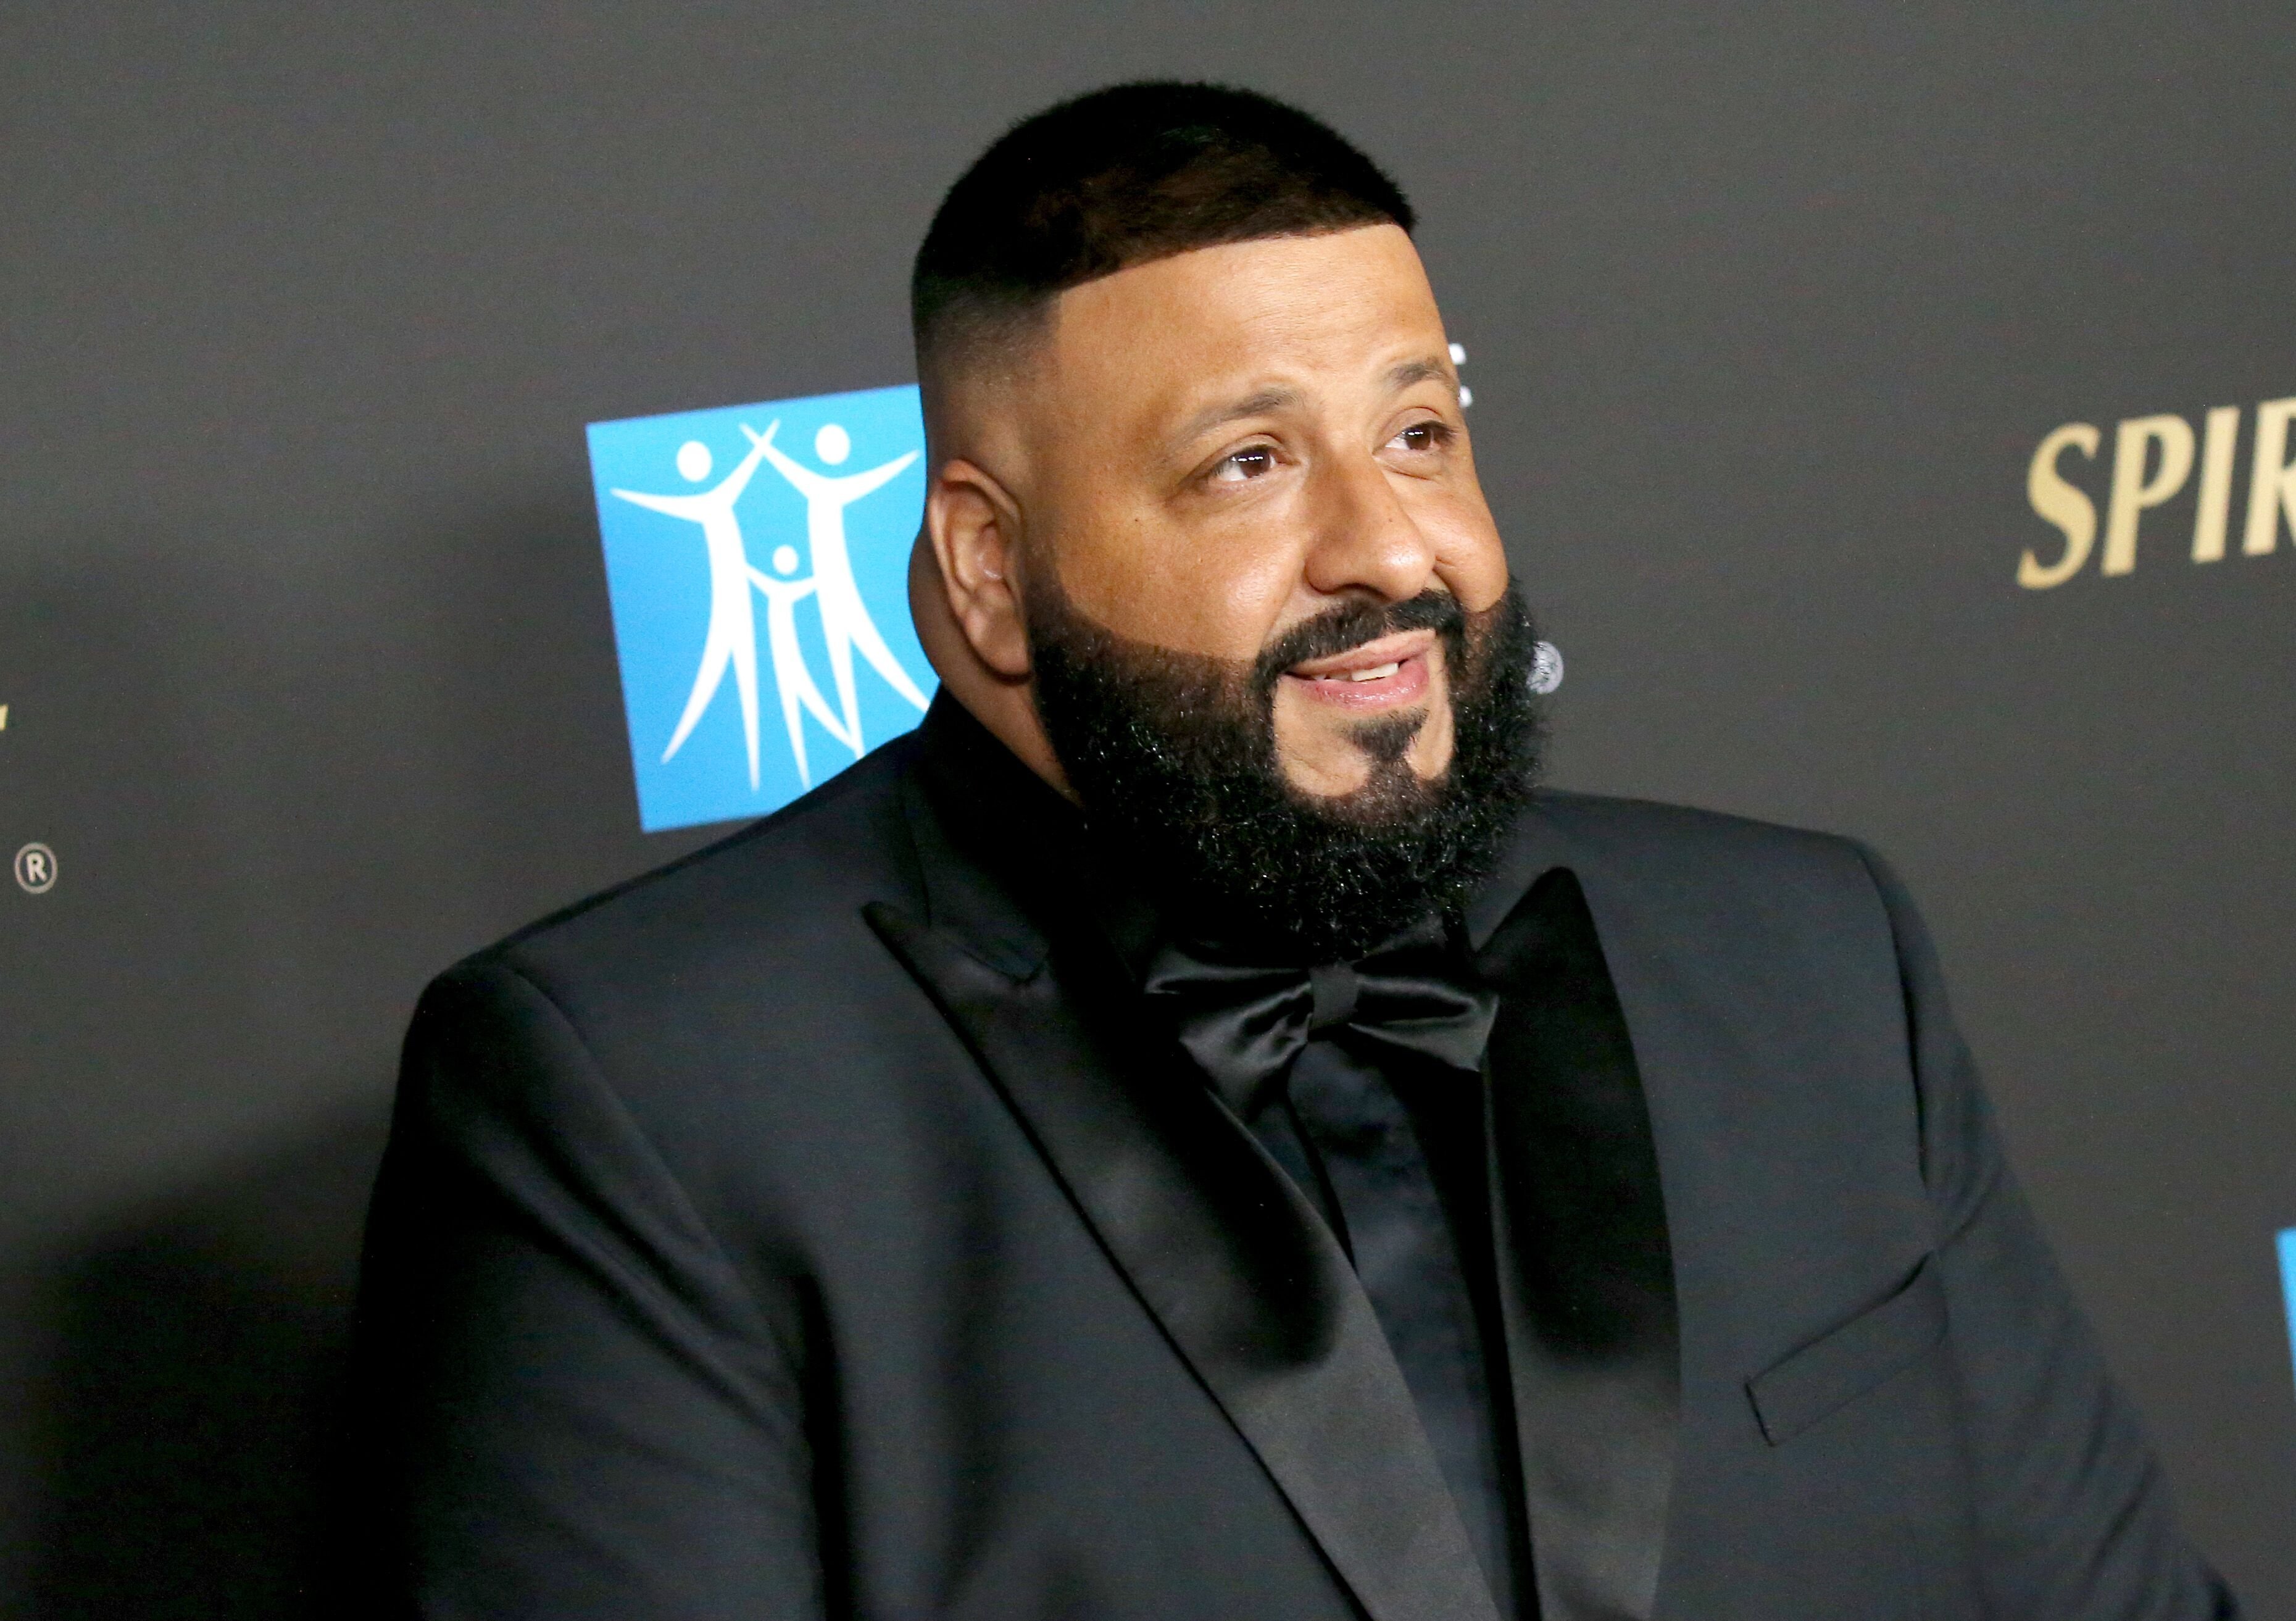 DJ Khaled attends the City Of Hope's Spirit of Life 2019 Gala held at The Barker Hangar on October 10, 2019. | Photo: Getty Images